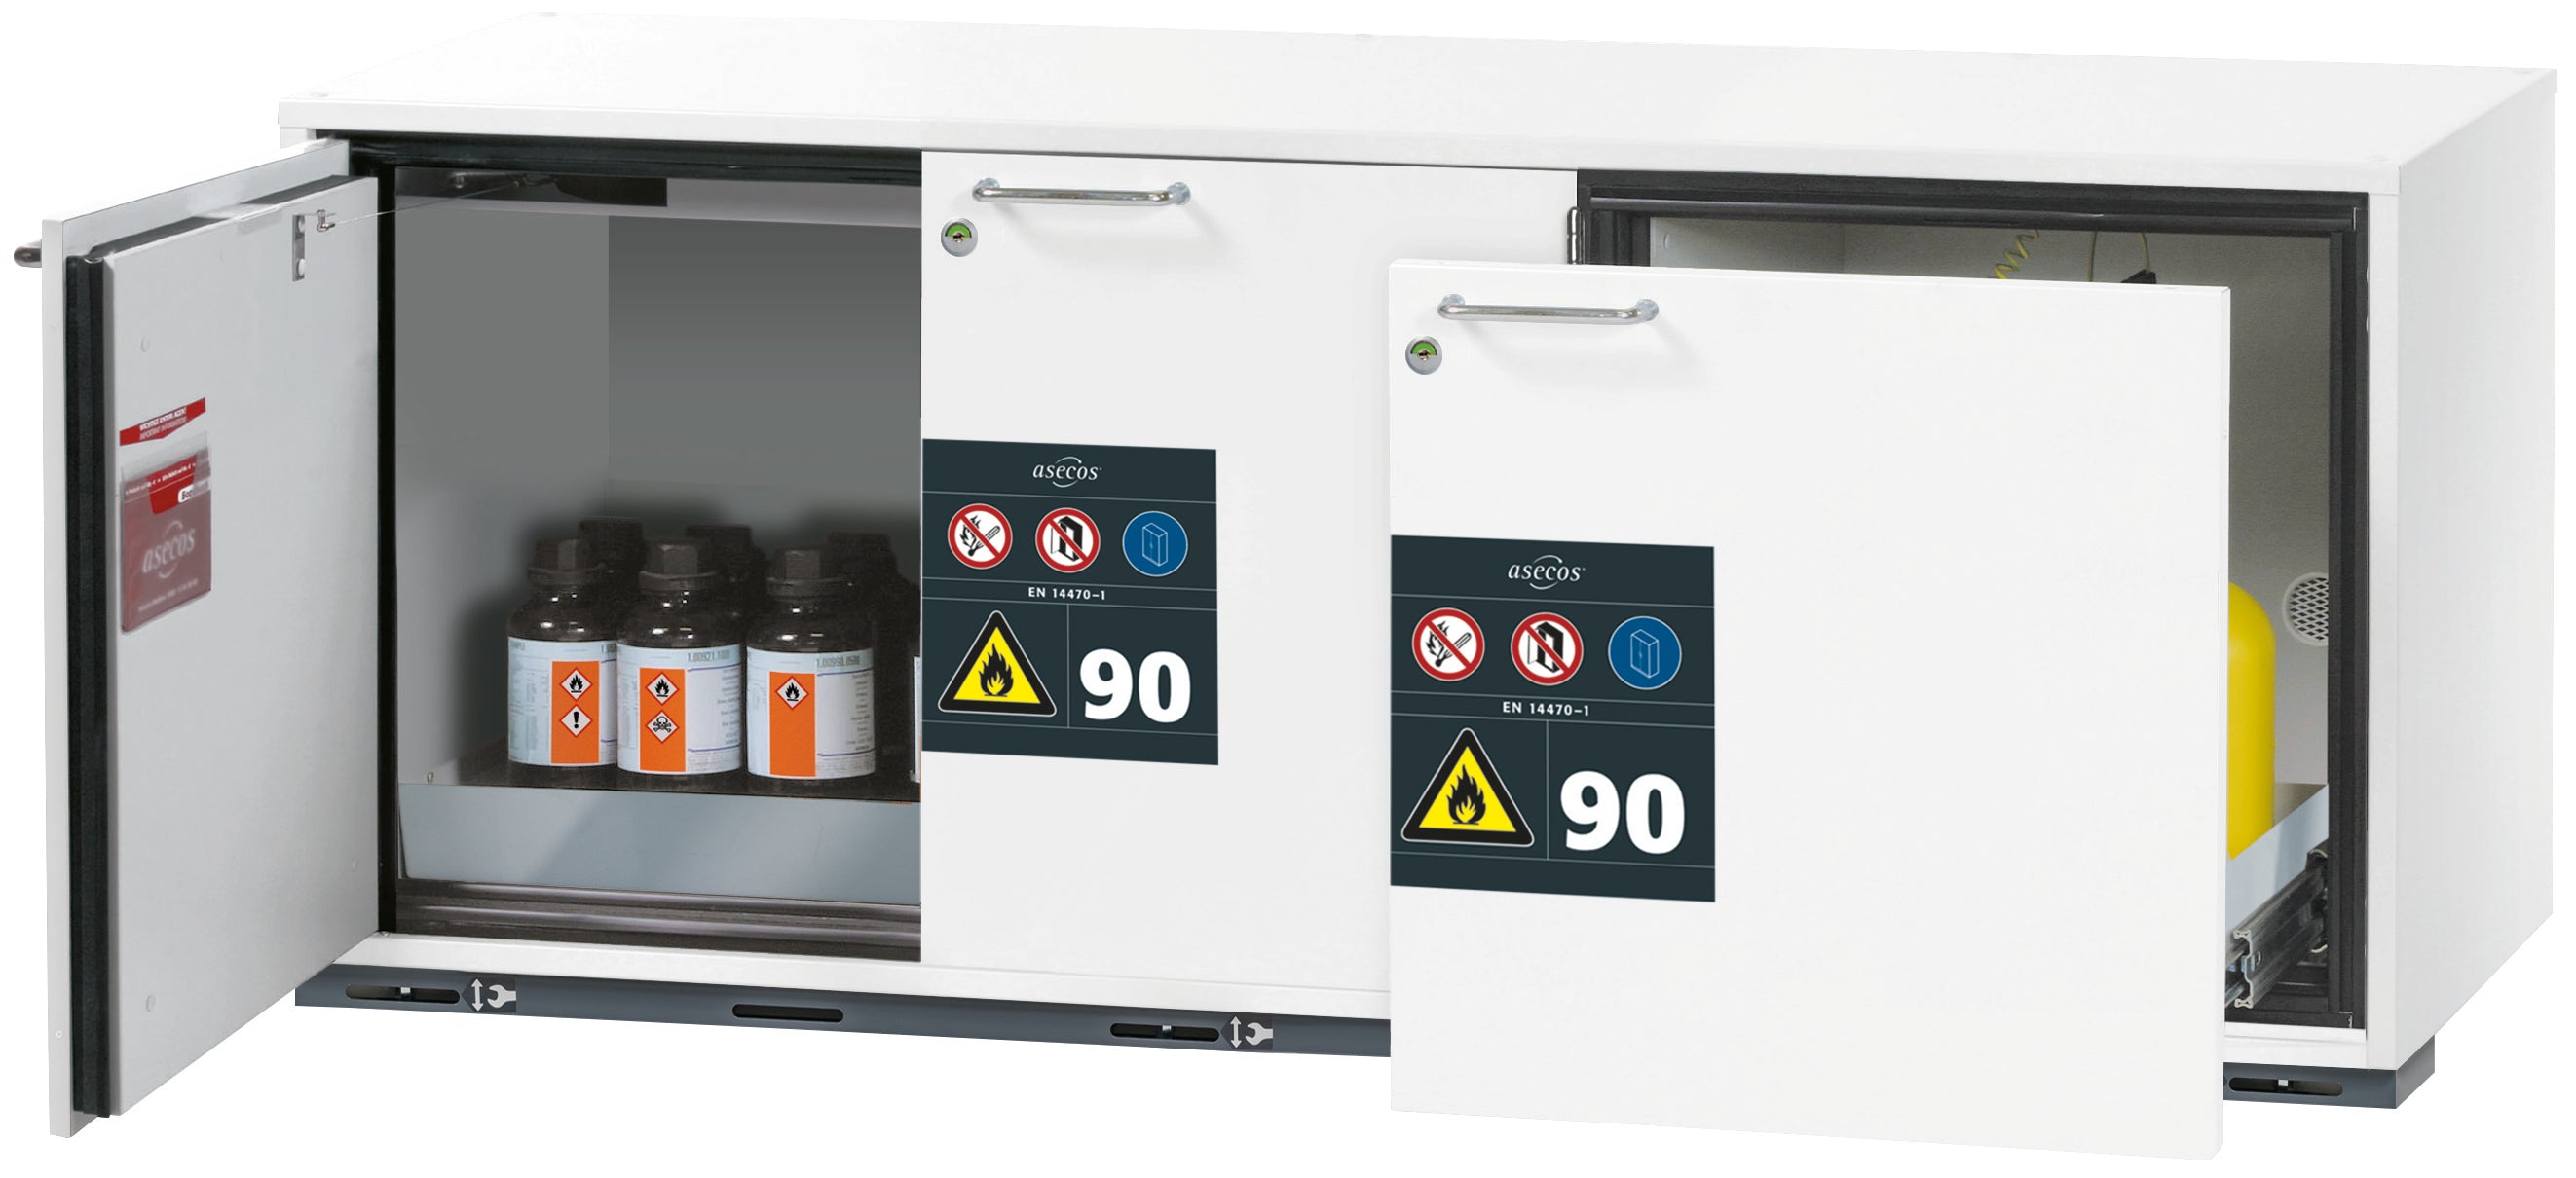 Type 90 safety base cabinet UB-ST-90 model UB90.060.140.S2T in laboratory white (similar to RAL 9016) with 1x perforated plate insert standard (stainless steel 1.4016)